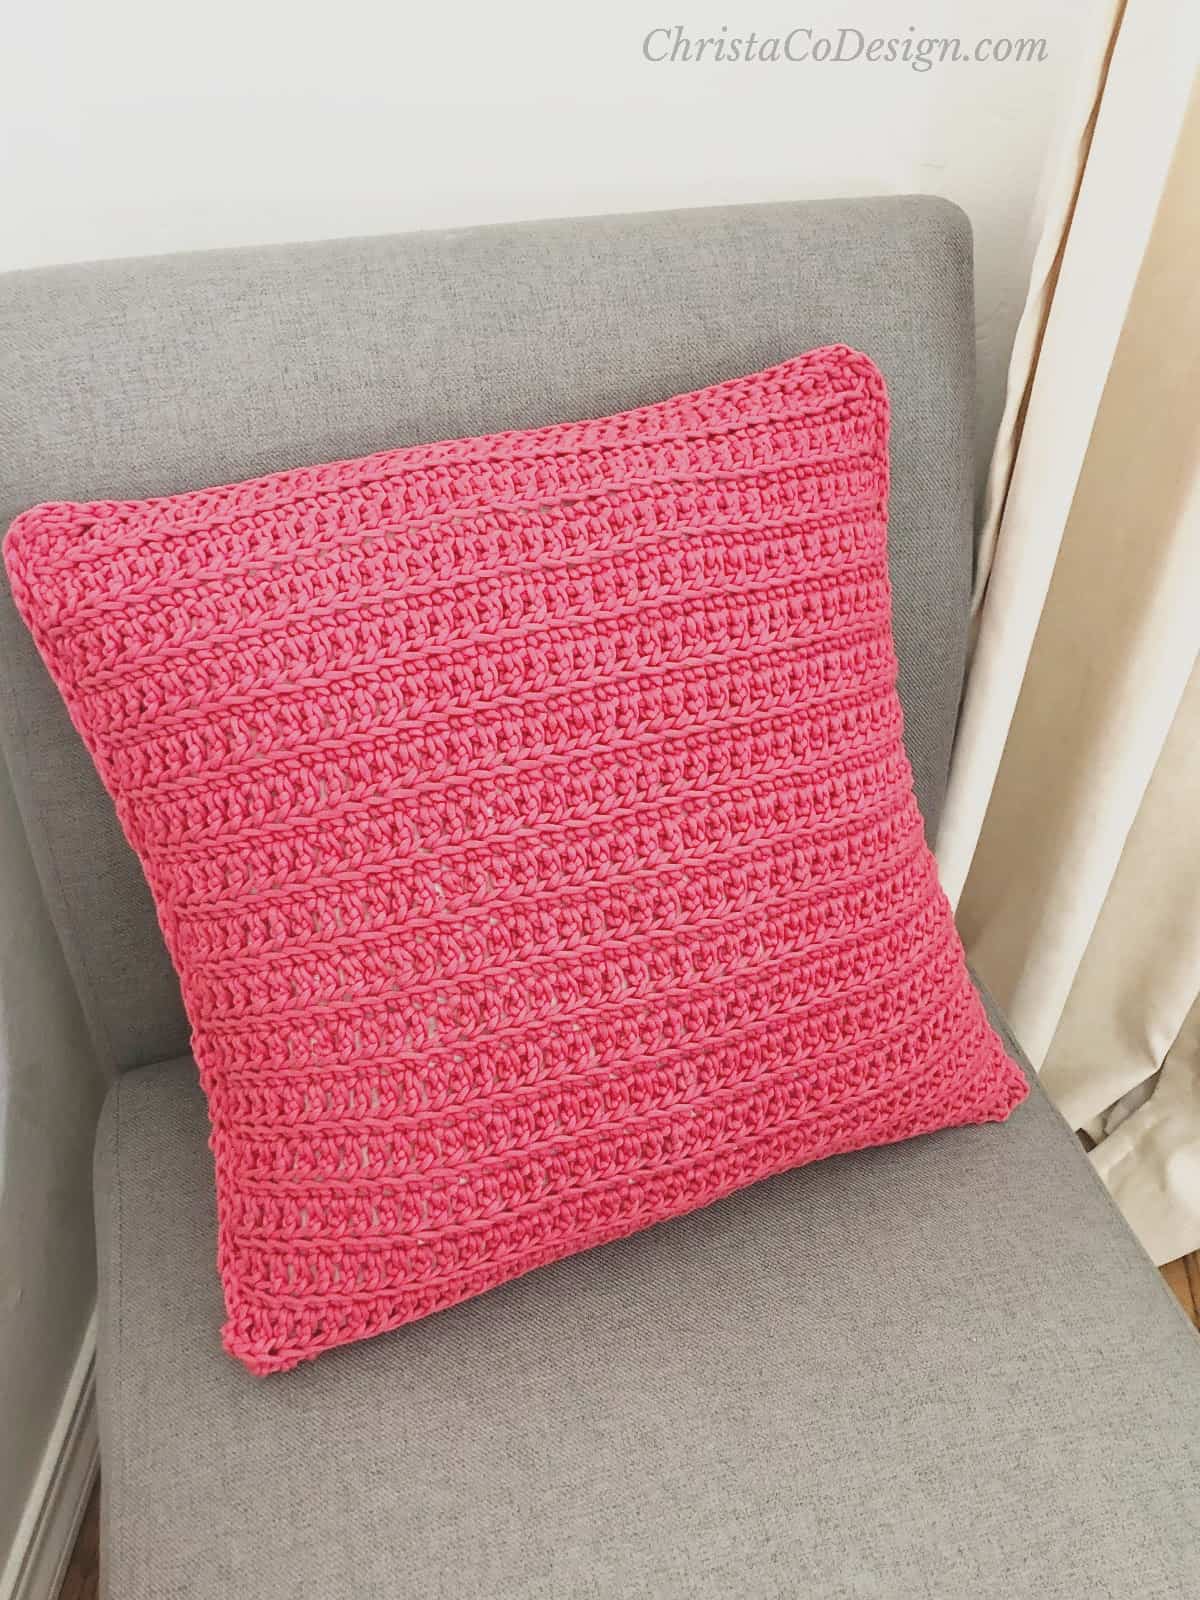 How to Crochet an Envelope Pillow Pattern the Piazza Pillow